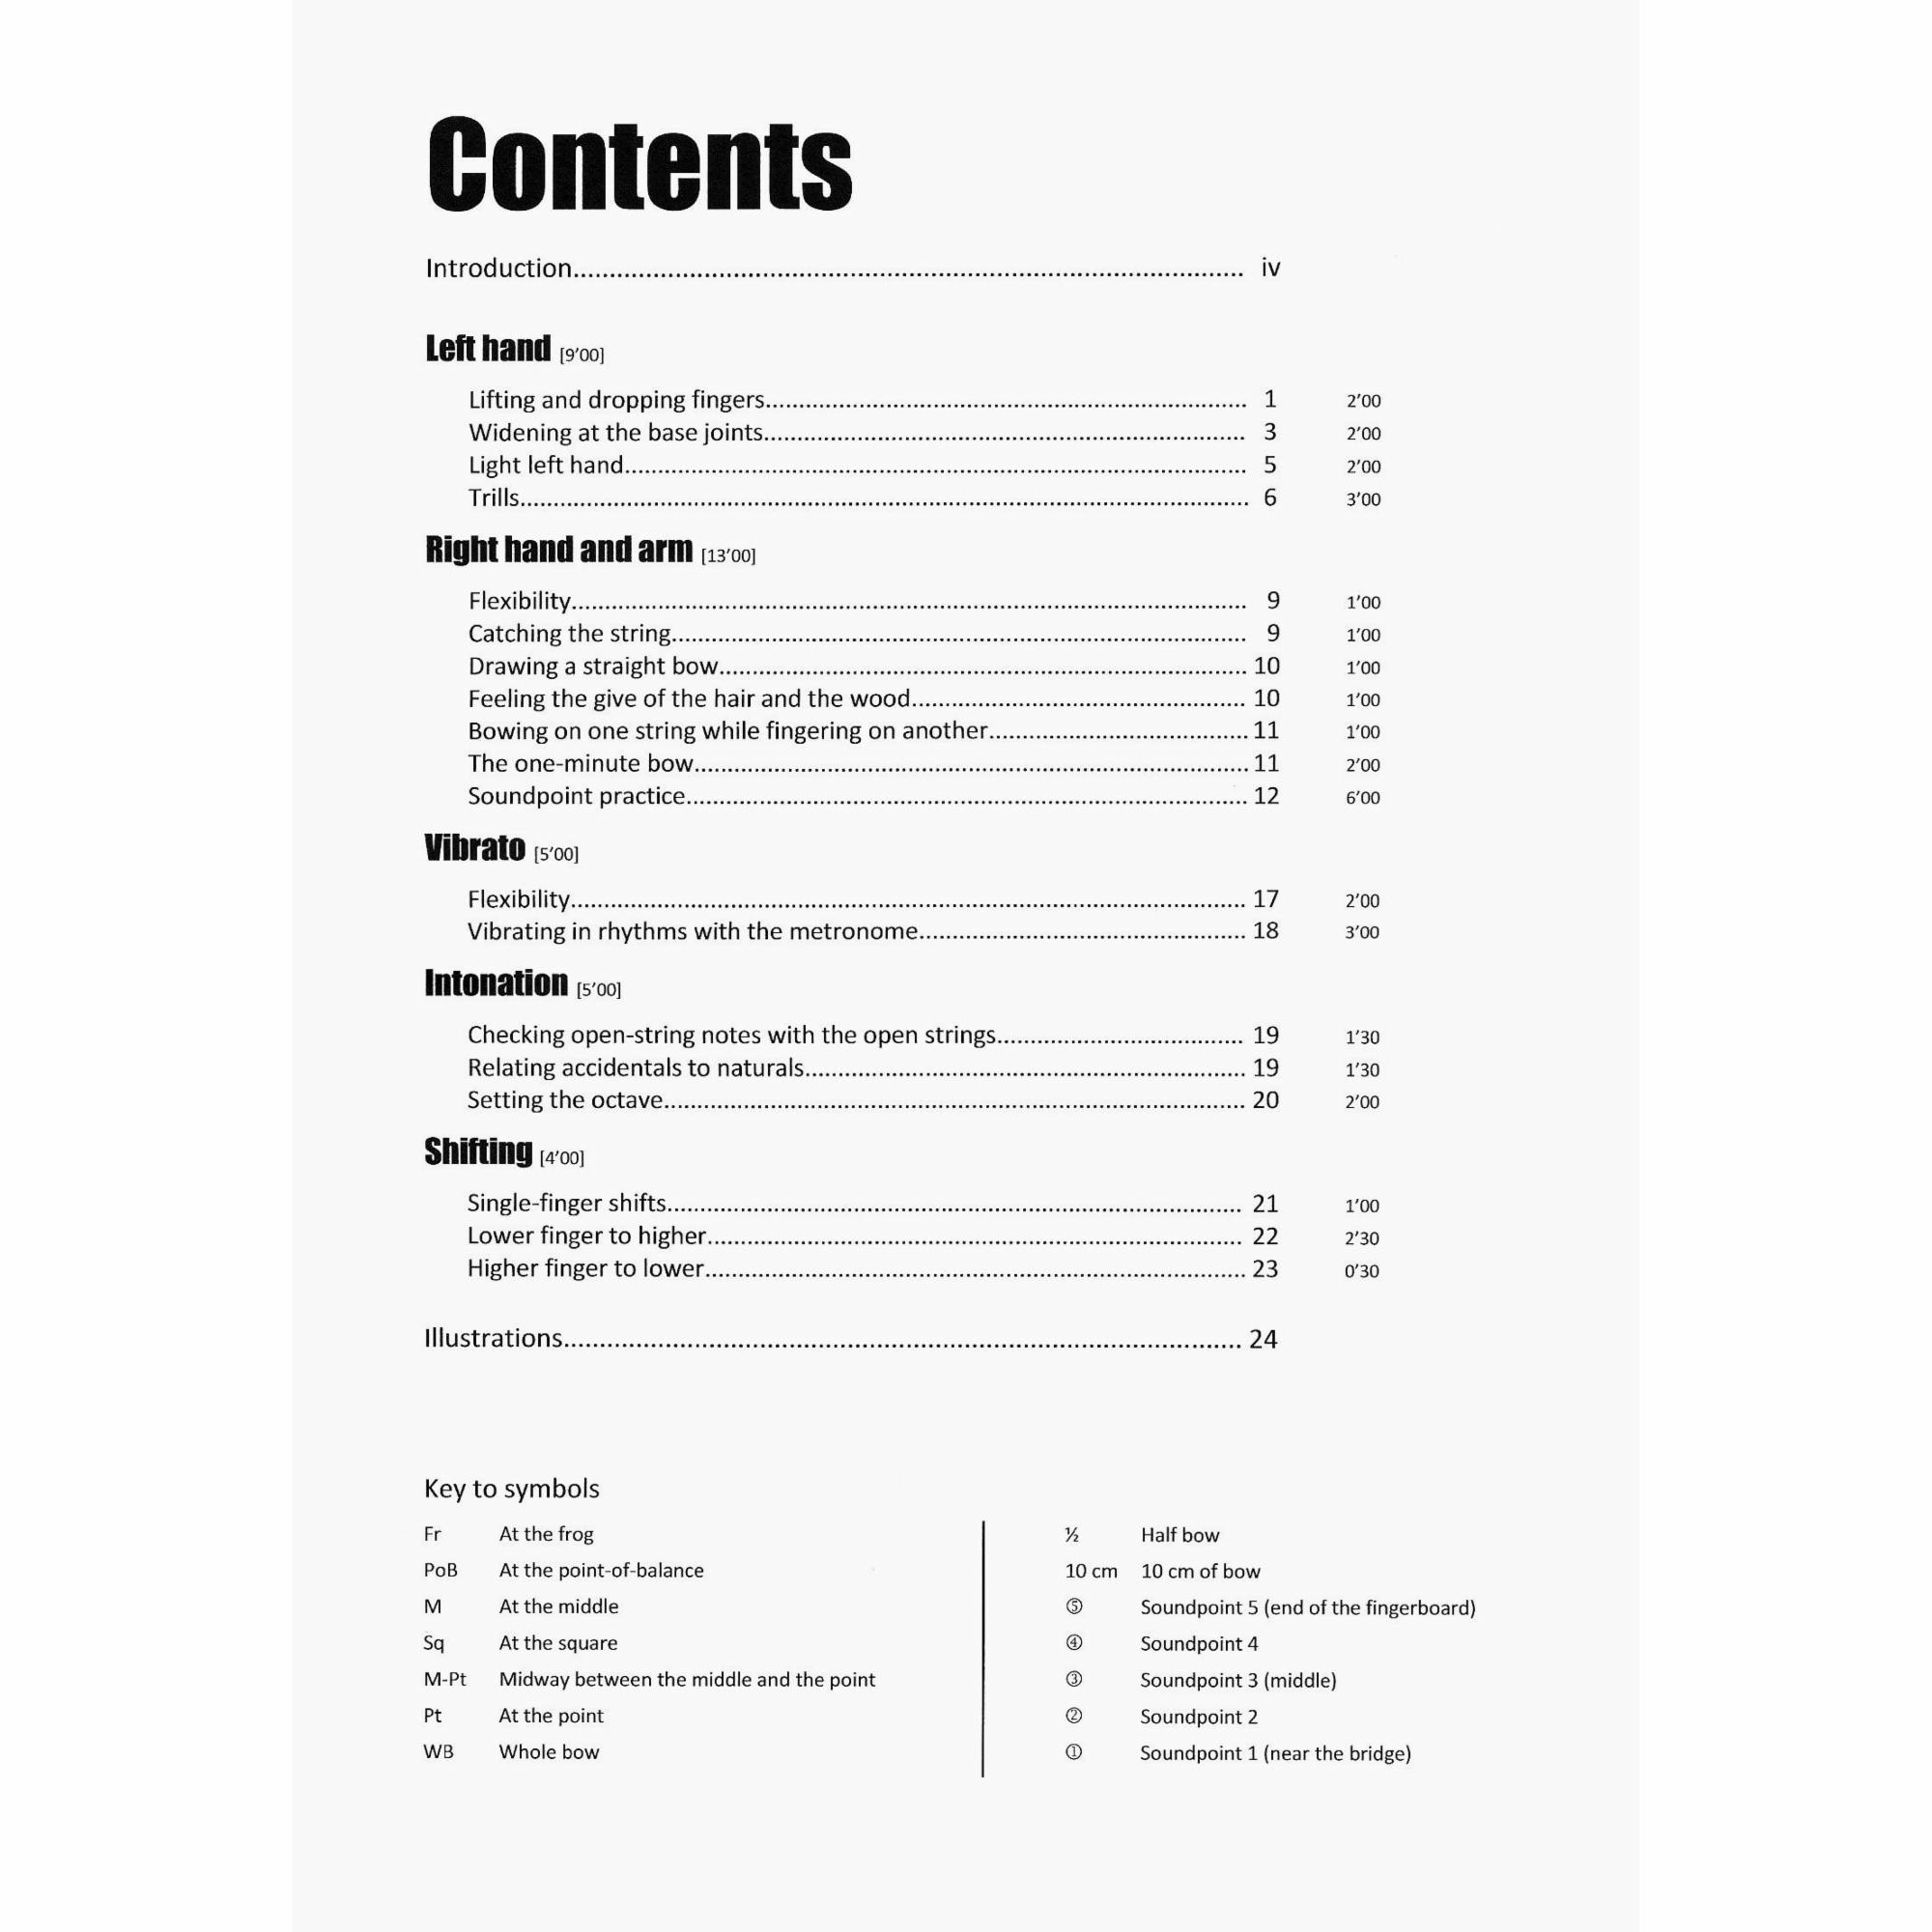 Sample: Book, Contents